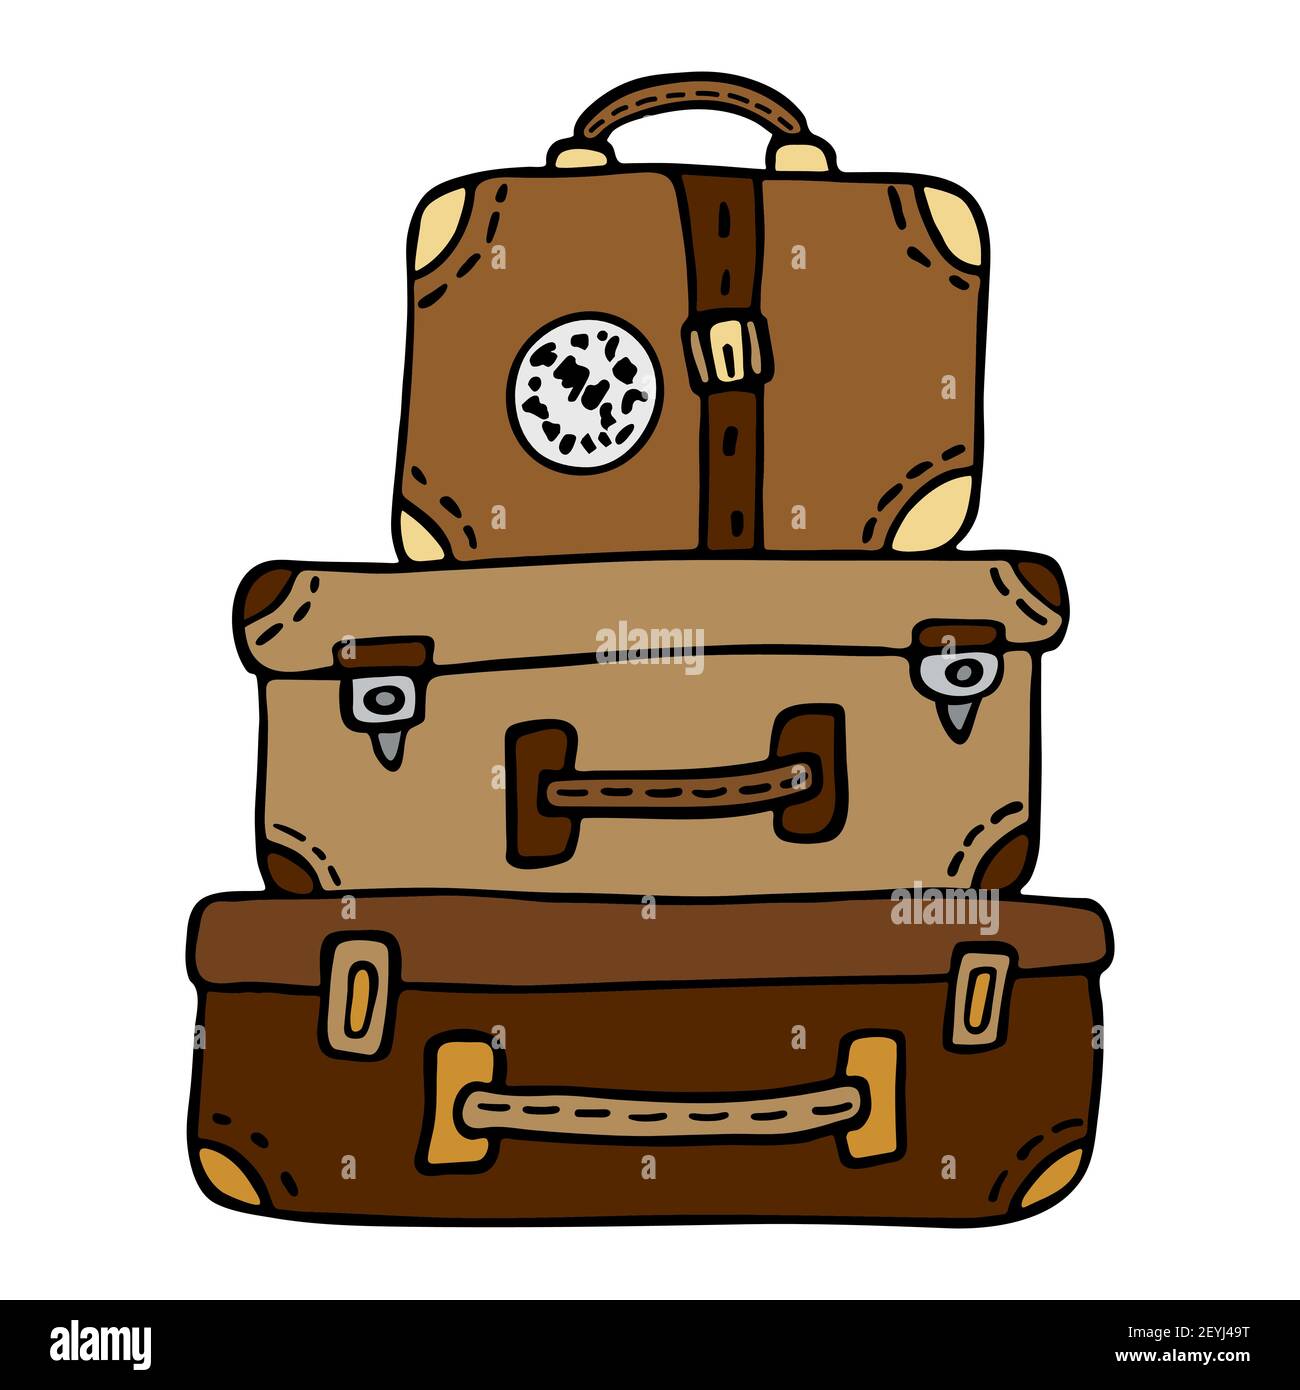 A stack of retro leather traveler suitcases with a sticker and straps, brown and red. Vector illustration in a cartoony style handdrawn on white backg Stock Vector